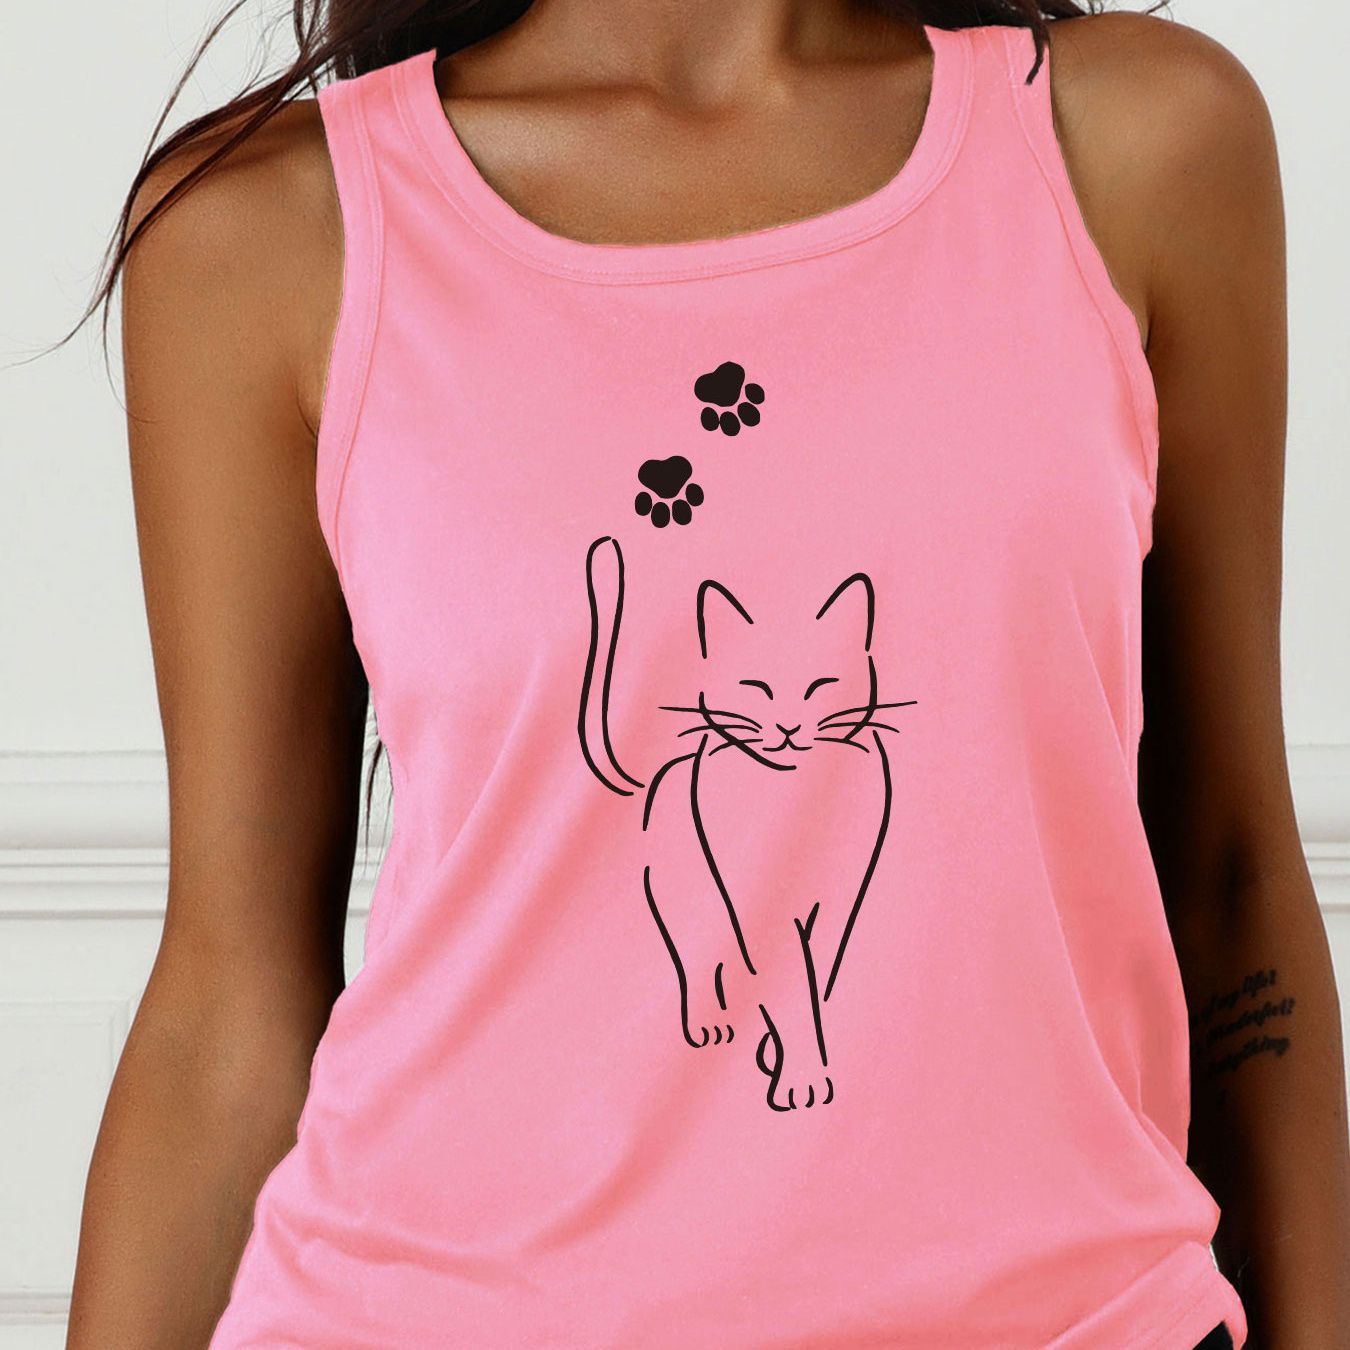 

Cat Print Crew Neck Tank Top, Casual Sleeveless Tank Top For Summer, Women's Clothing